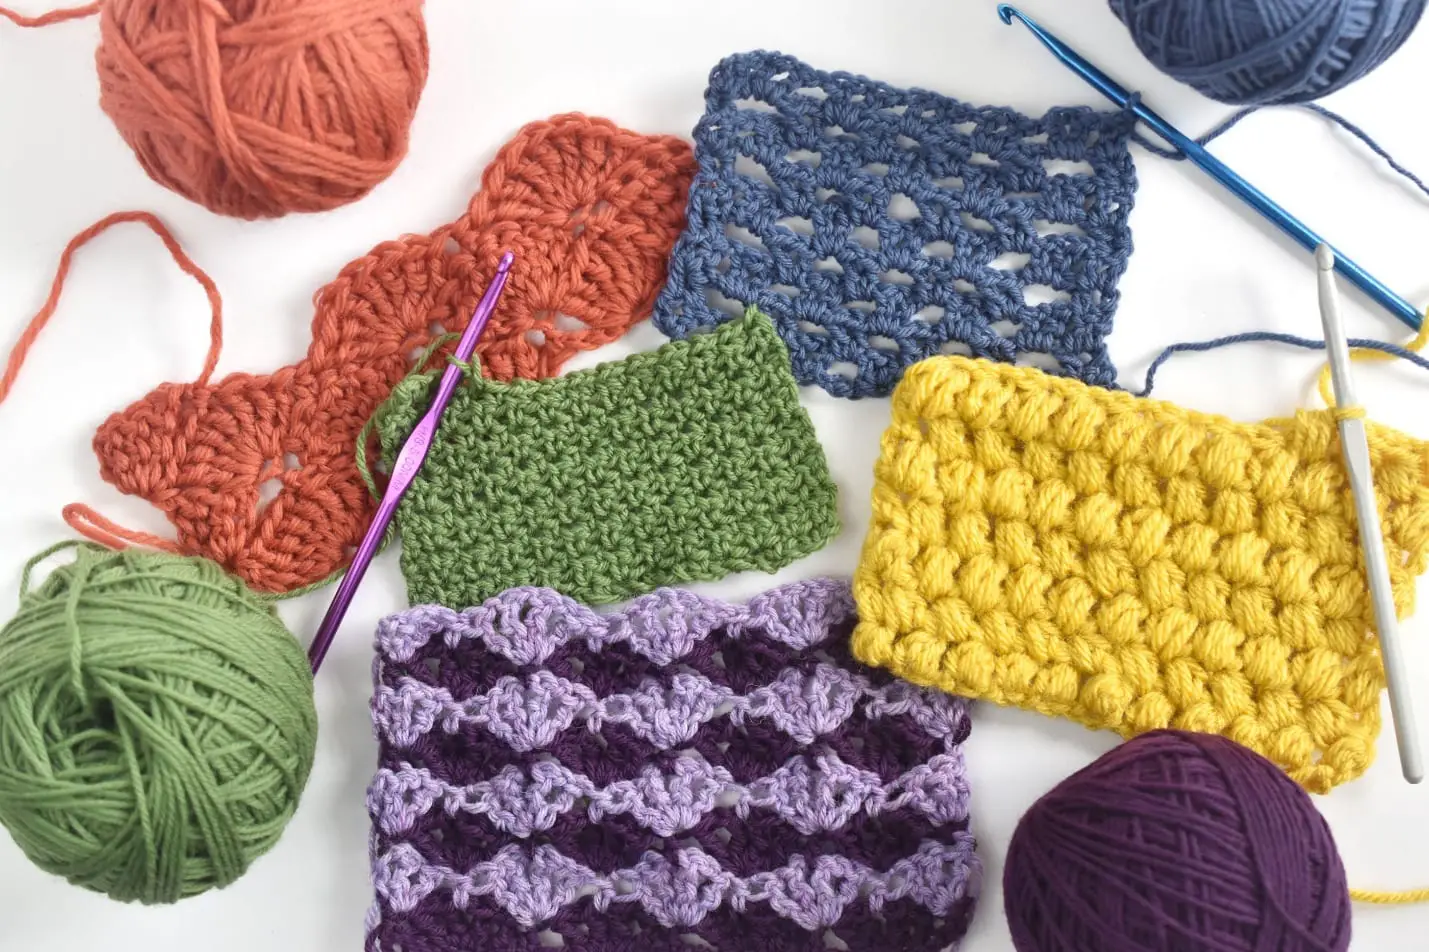 Basic Crocheting Stitches Every Beginner Must Learn | Family Frugal Fun